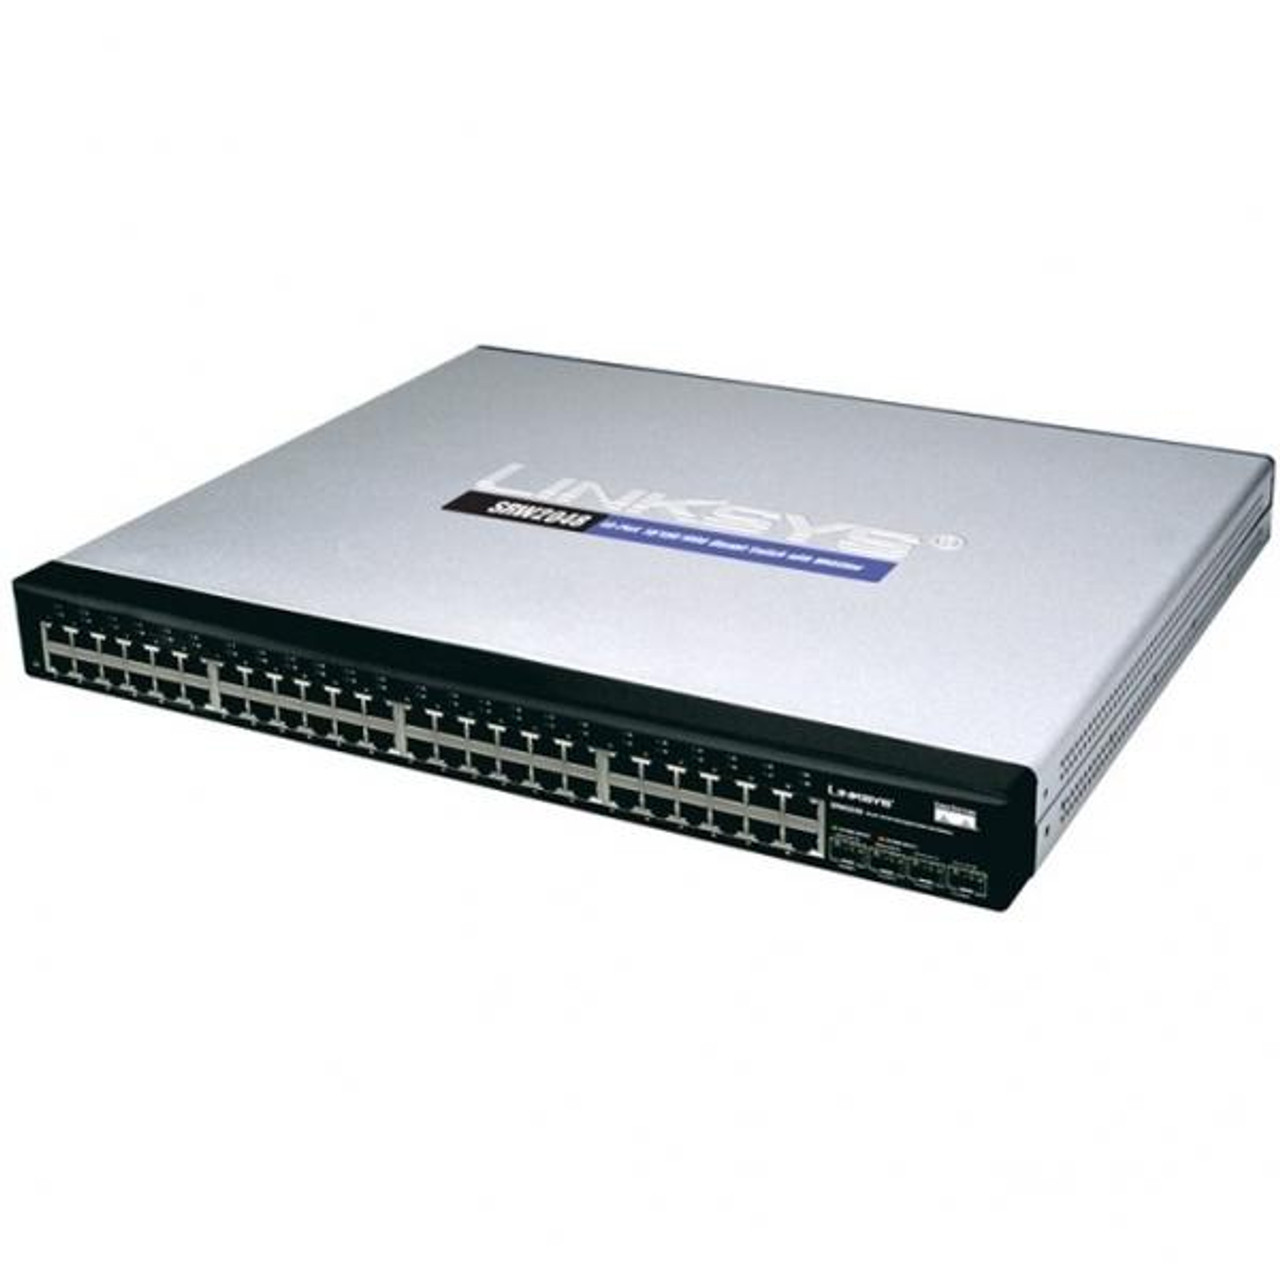 SG-30052 Linksys 48-Ports 10/100/1000 Gigabit Switch with WebView Includes 48 10/100/1000 RJ-45 Ports and 4 Shared SFP (MiniGBIC) Slots (Refurbished)